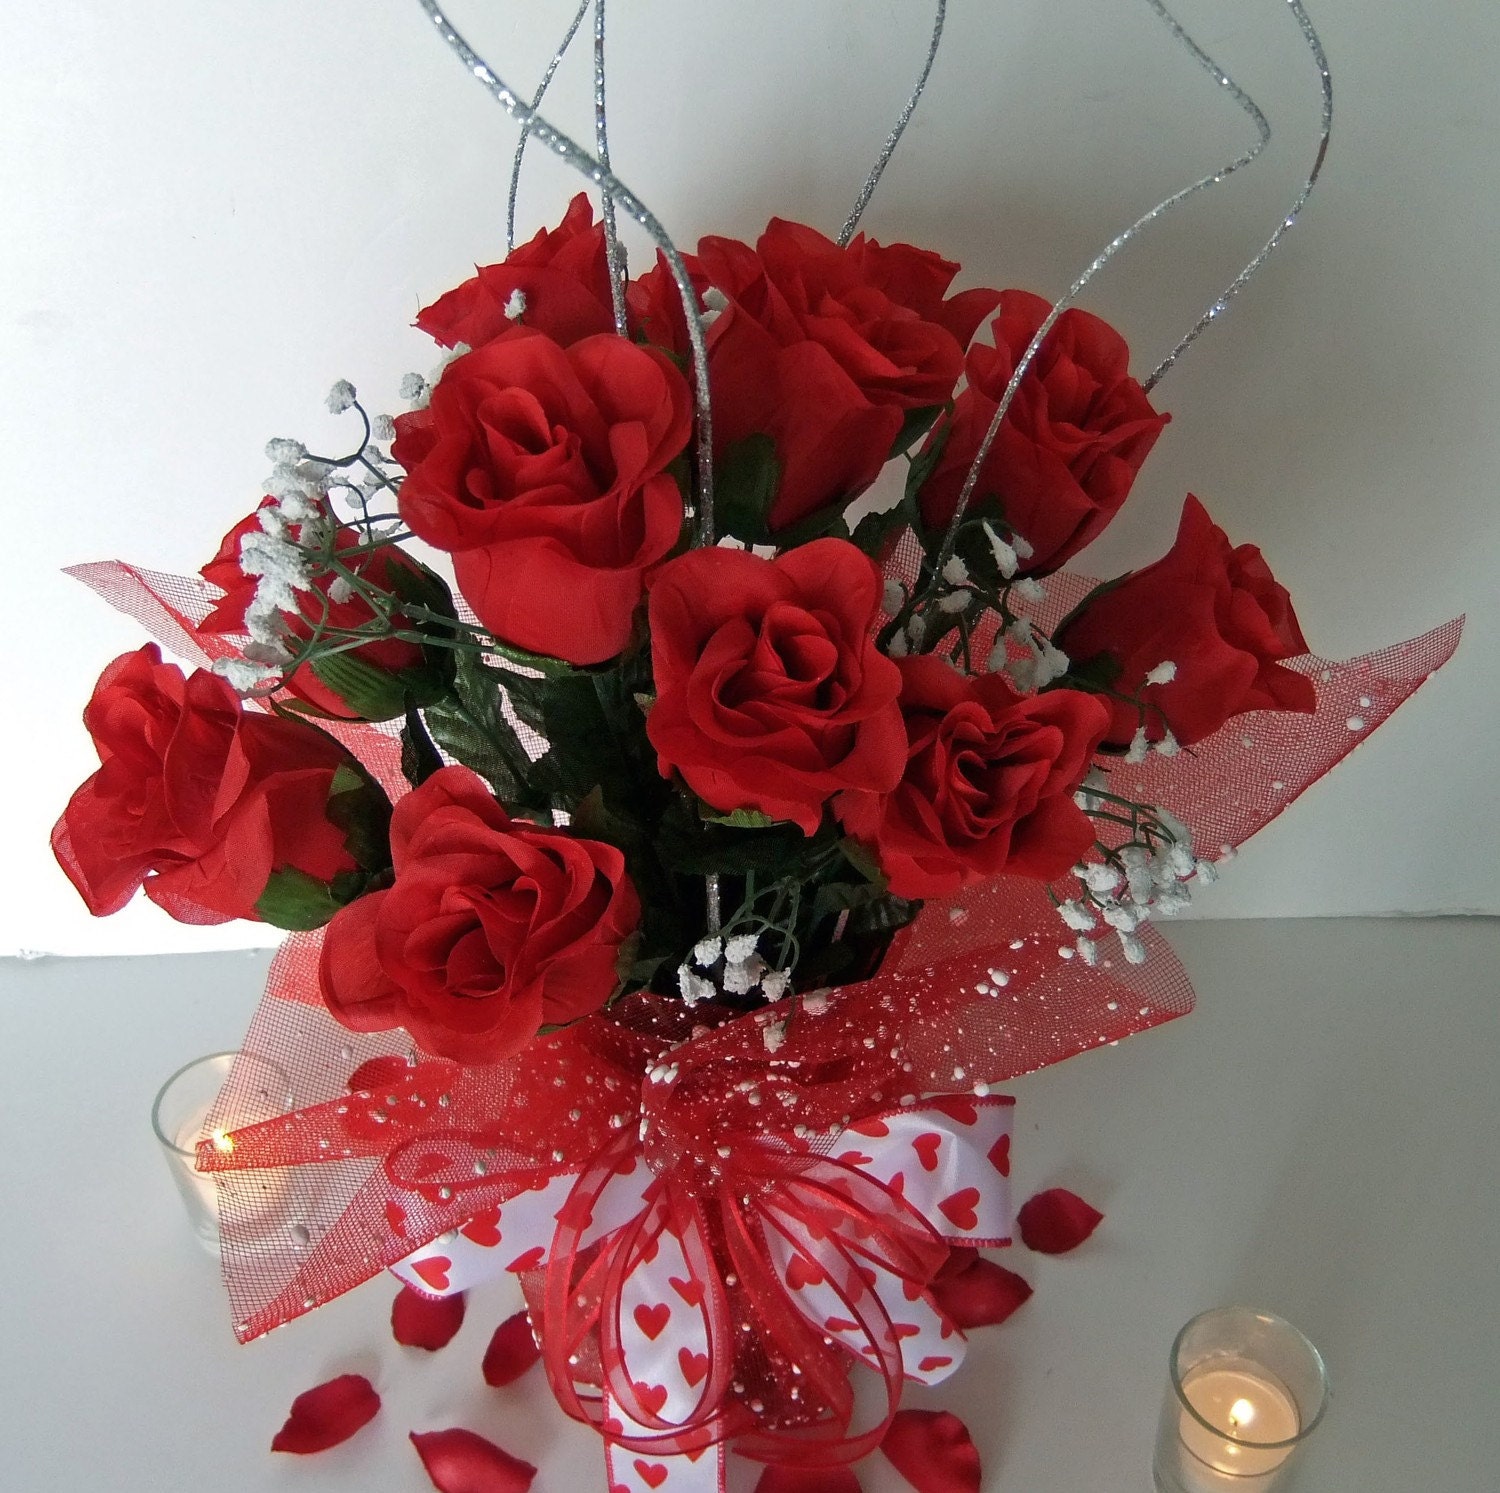 Reserved Listing for Cheryl Wedding Centerpieces Red Roses